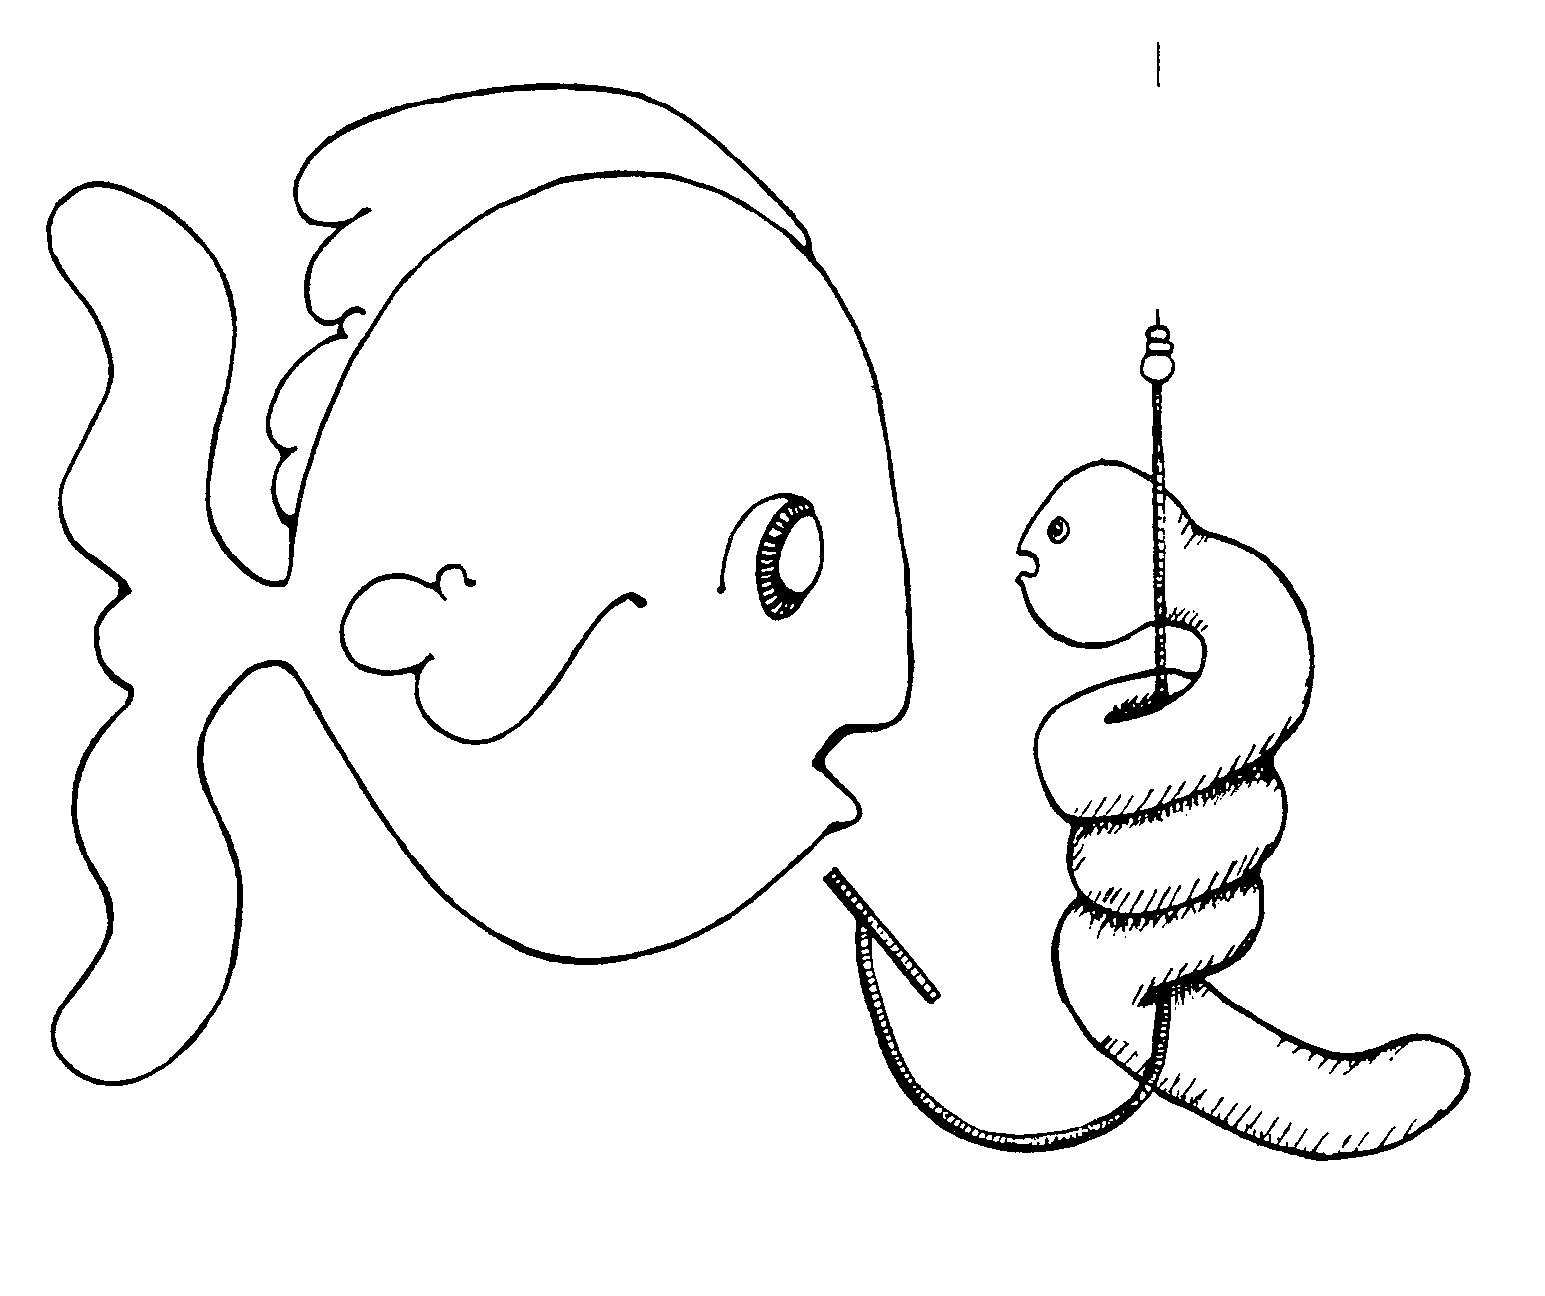 Fish And Worm   Lds Clipart And Handouts From Jennysmith Net